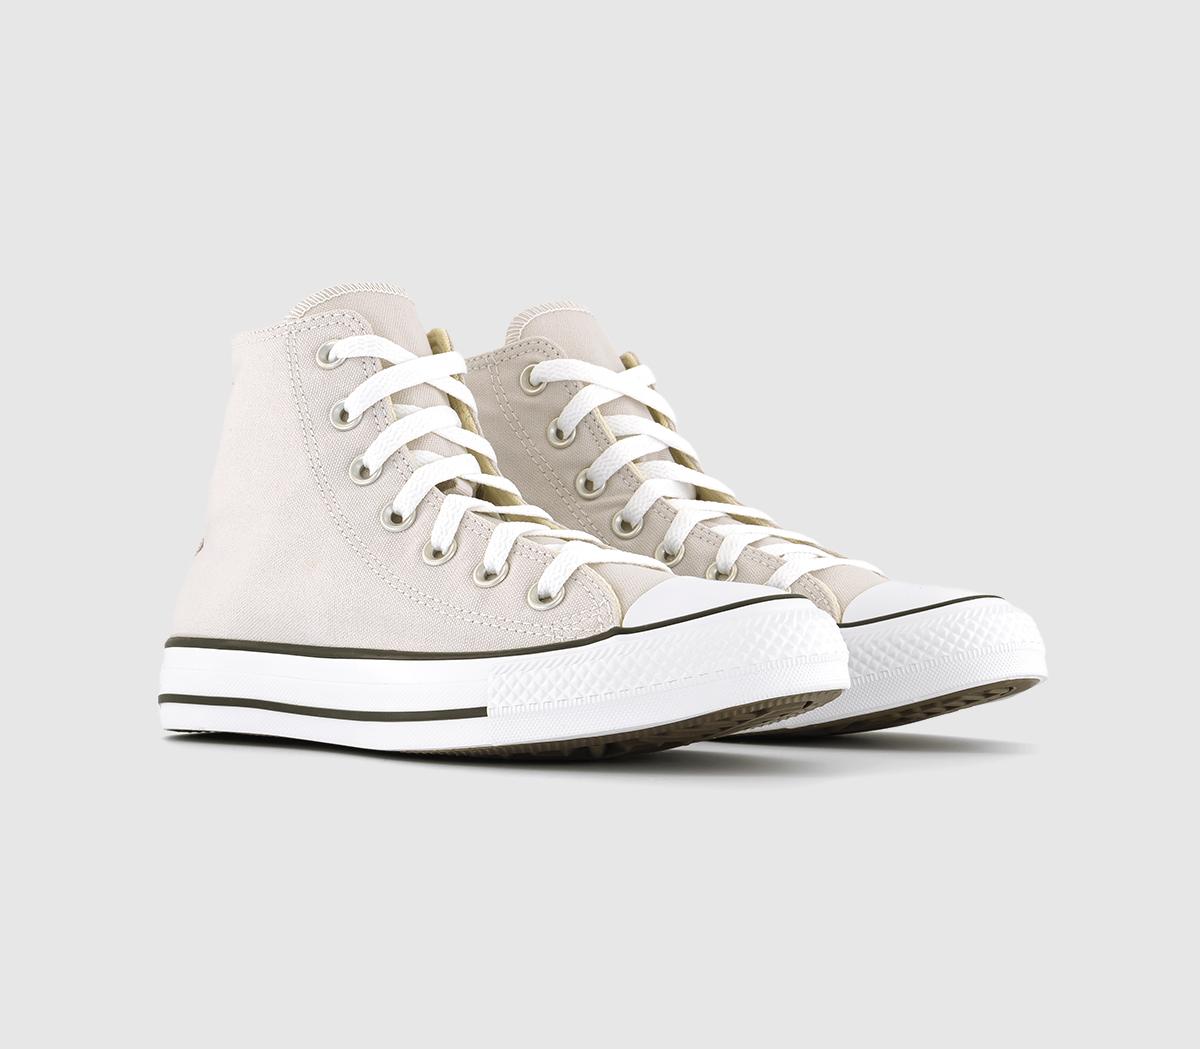 Converse All Star Hi Trainers Pale Putty White Black Natural, 8